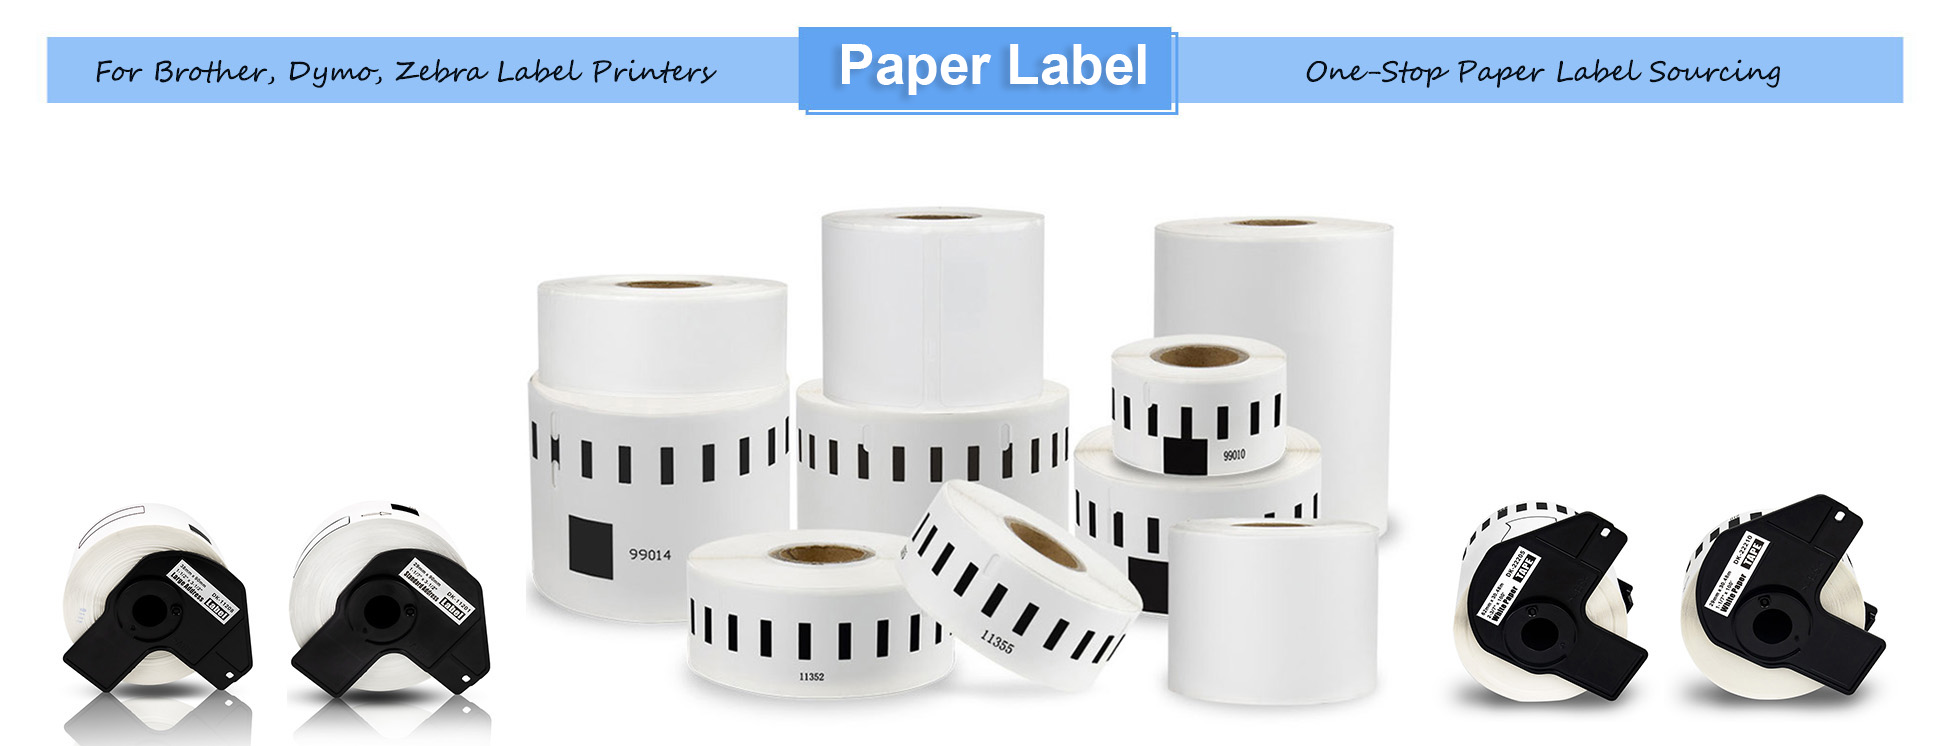 UNISMAR - One-stop supplier of paper label for Zebra, Brother and Dymo printer